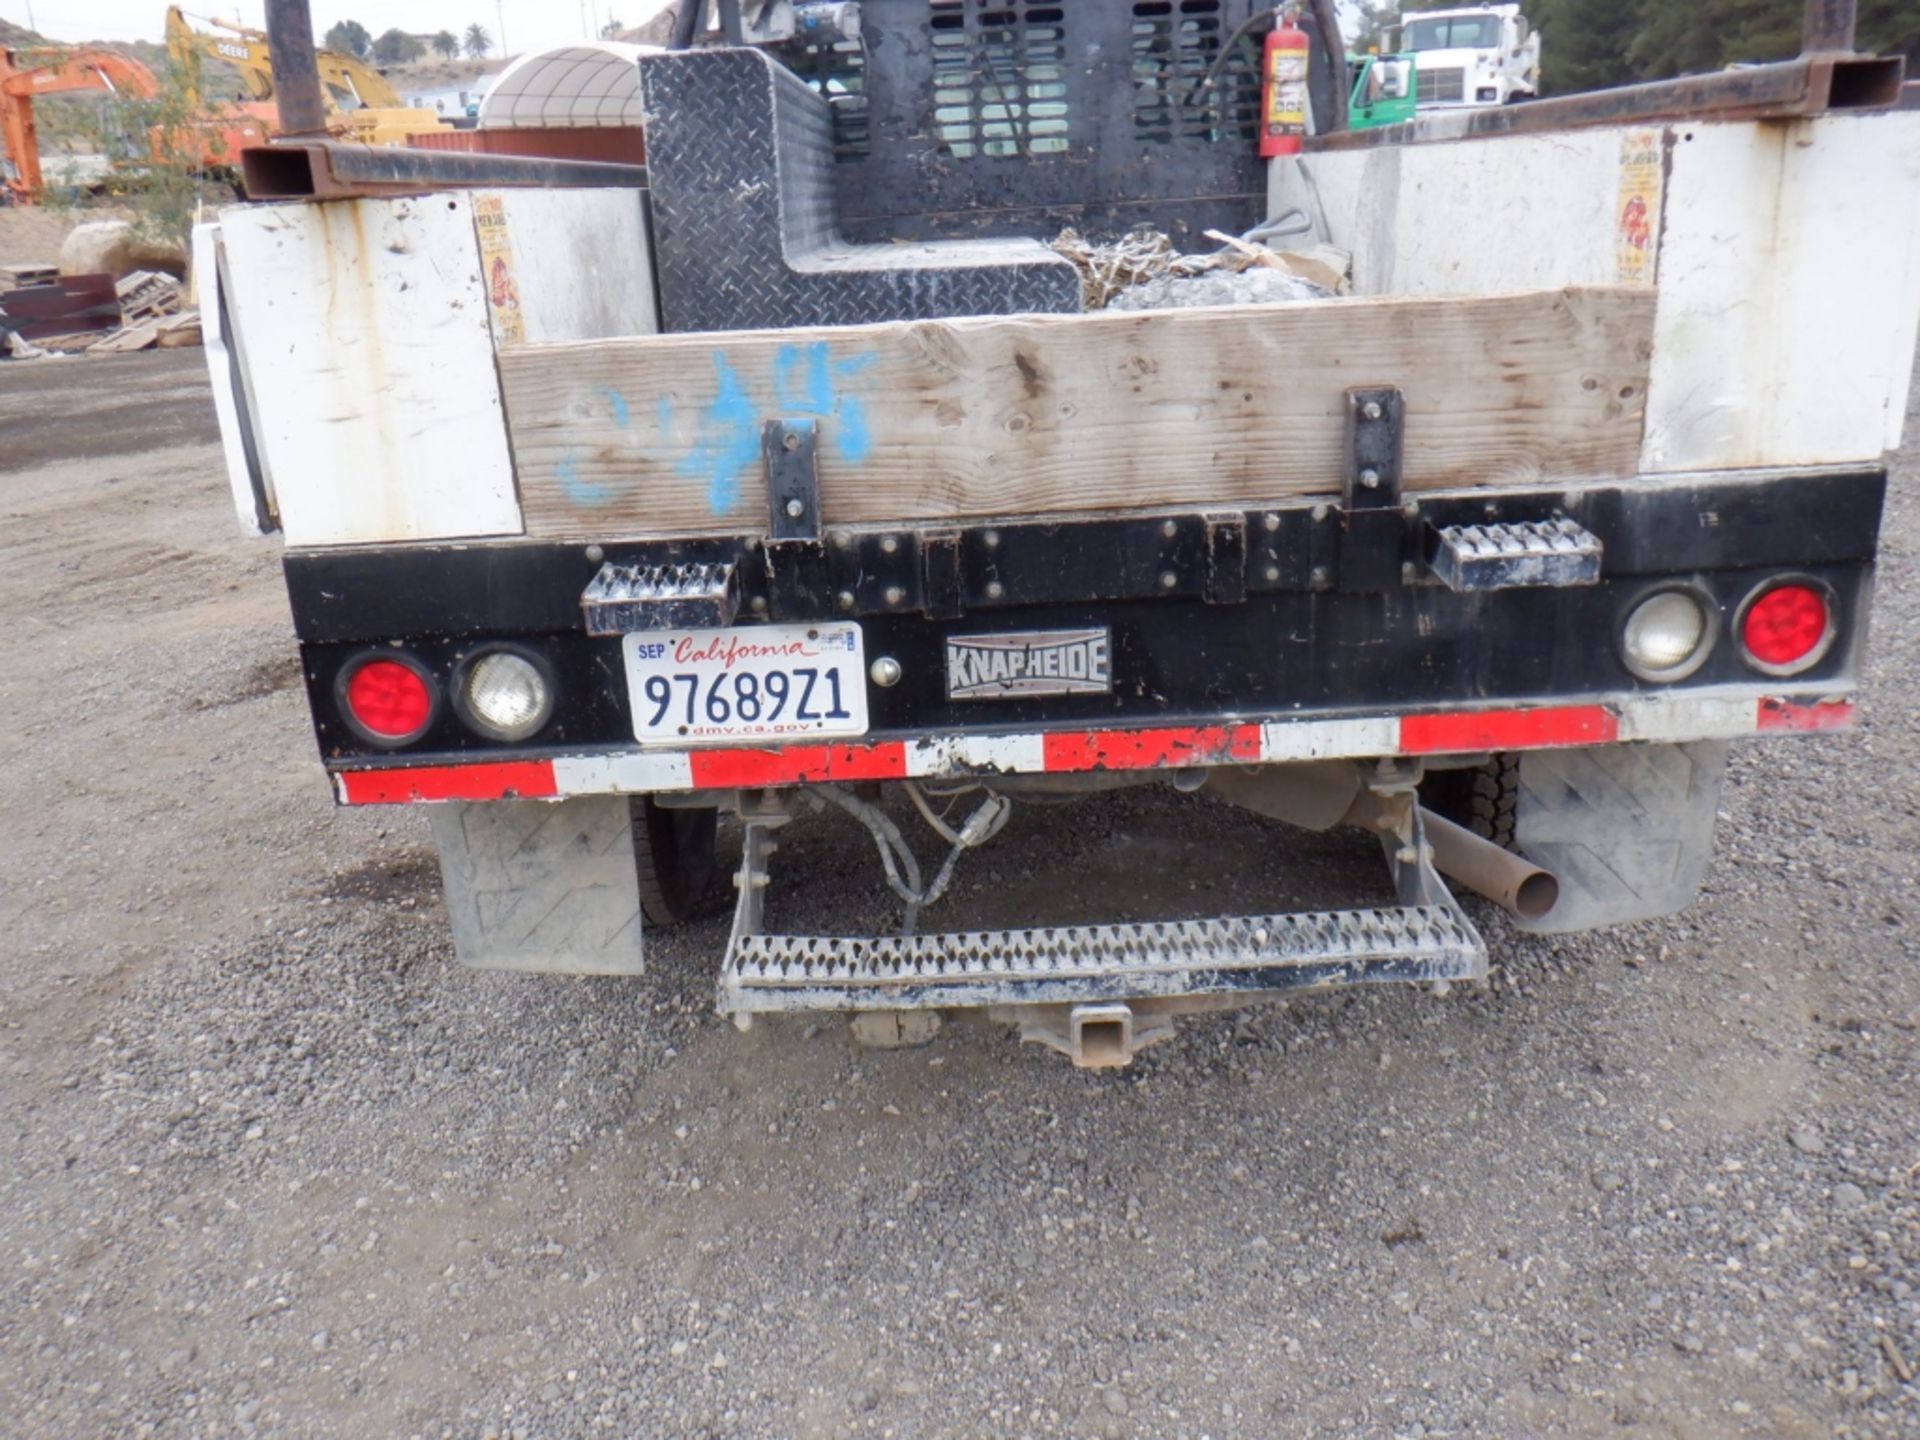 2010 Ford F250 Crew Cab Flatbed Truck, - Image 19 of 24